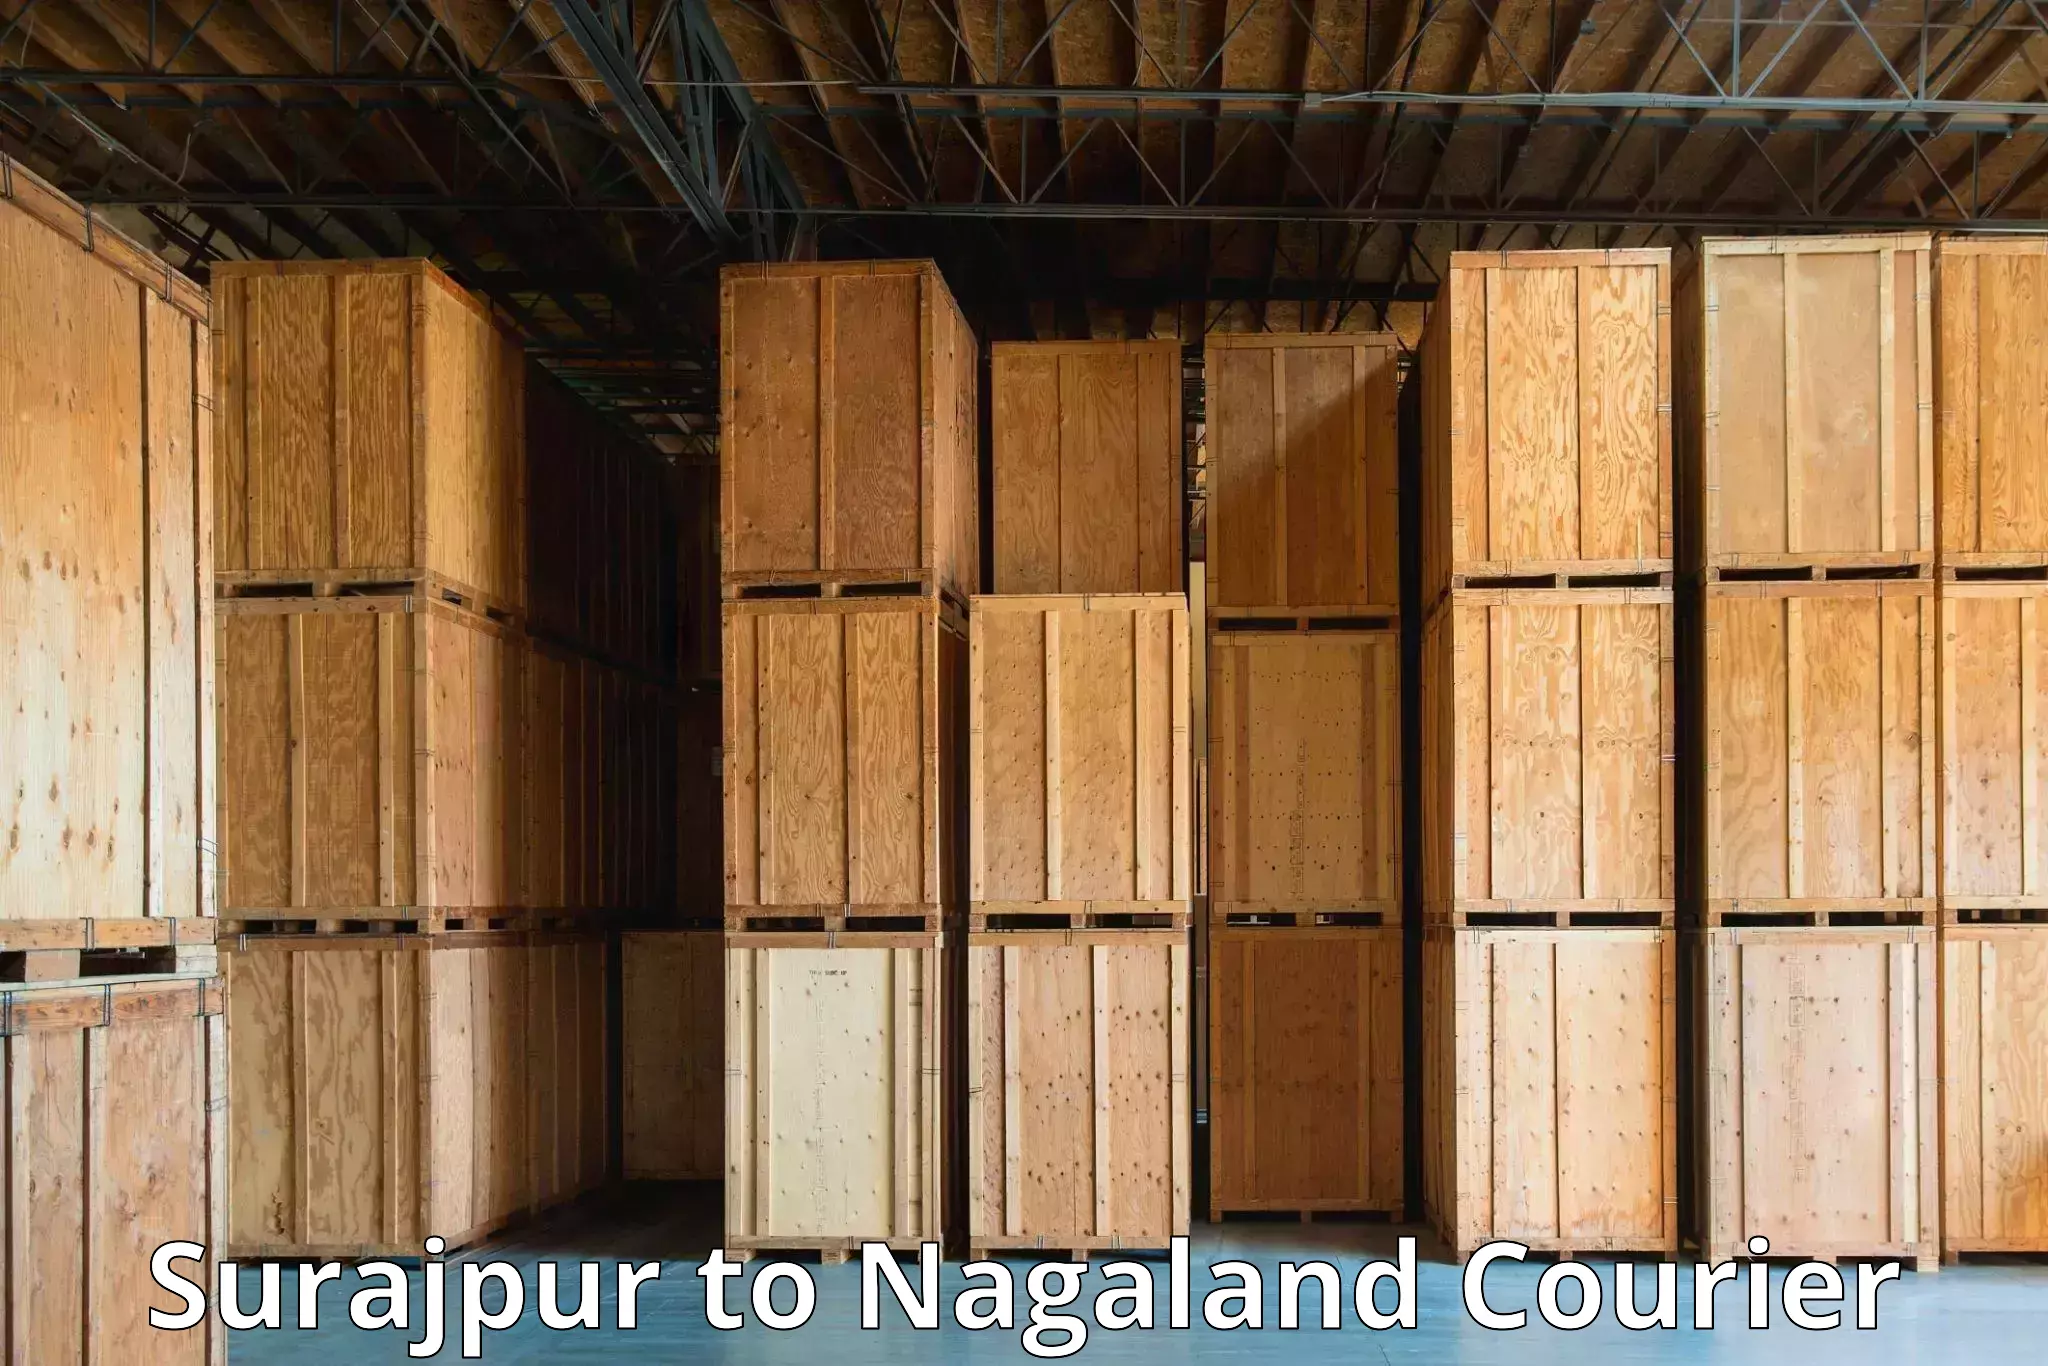 Subscription-based courier Surajpur to Nagaland